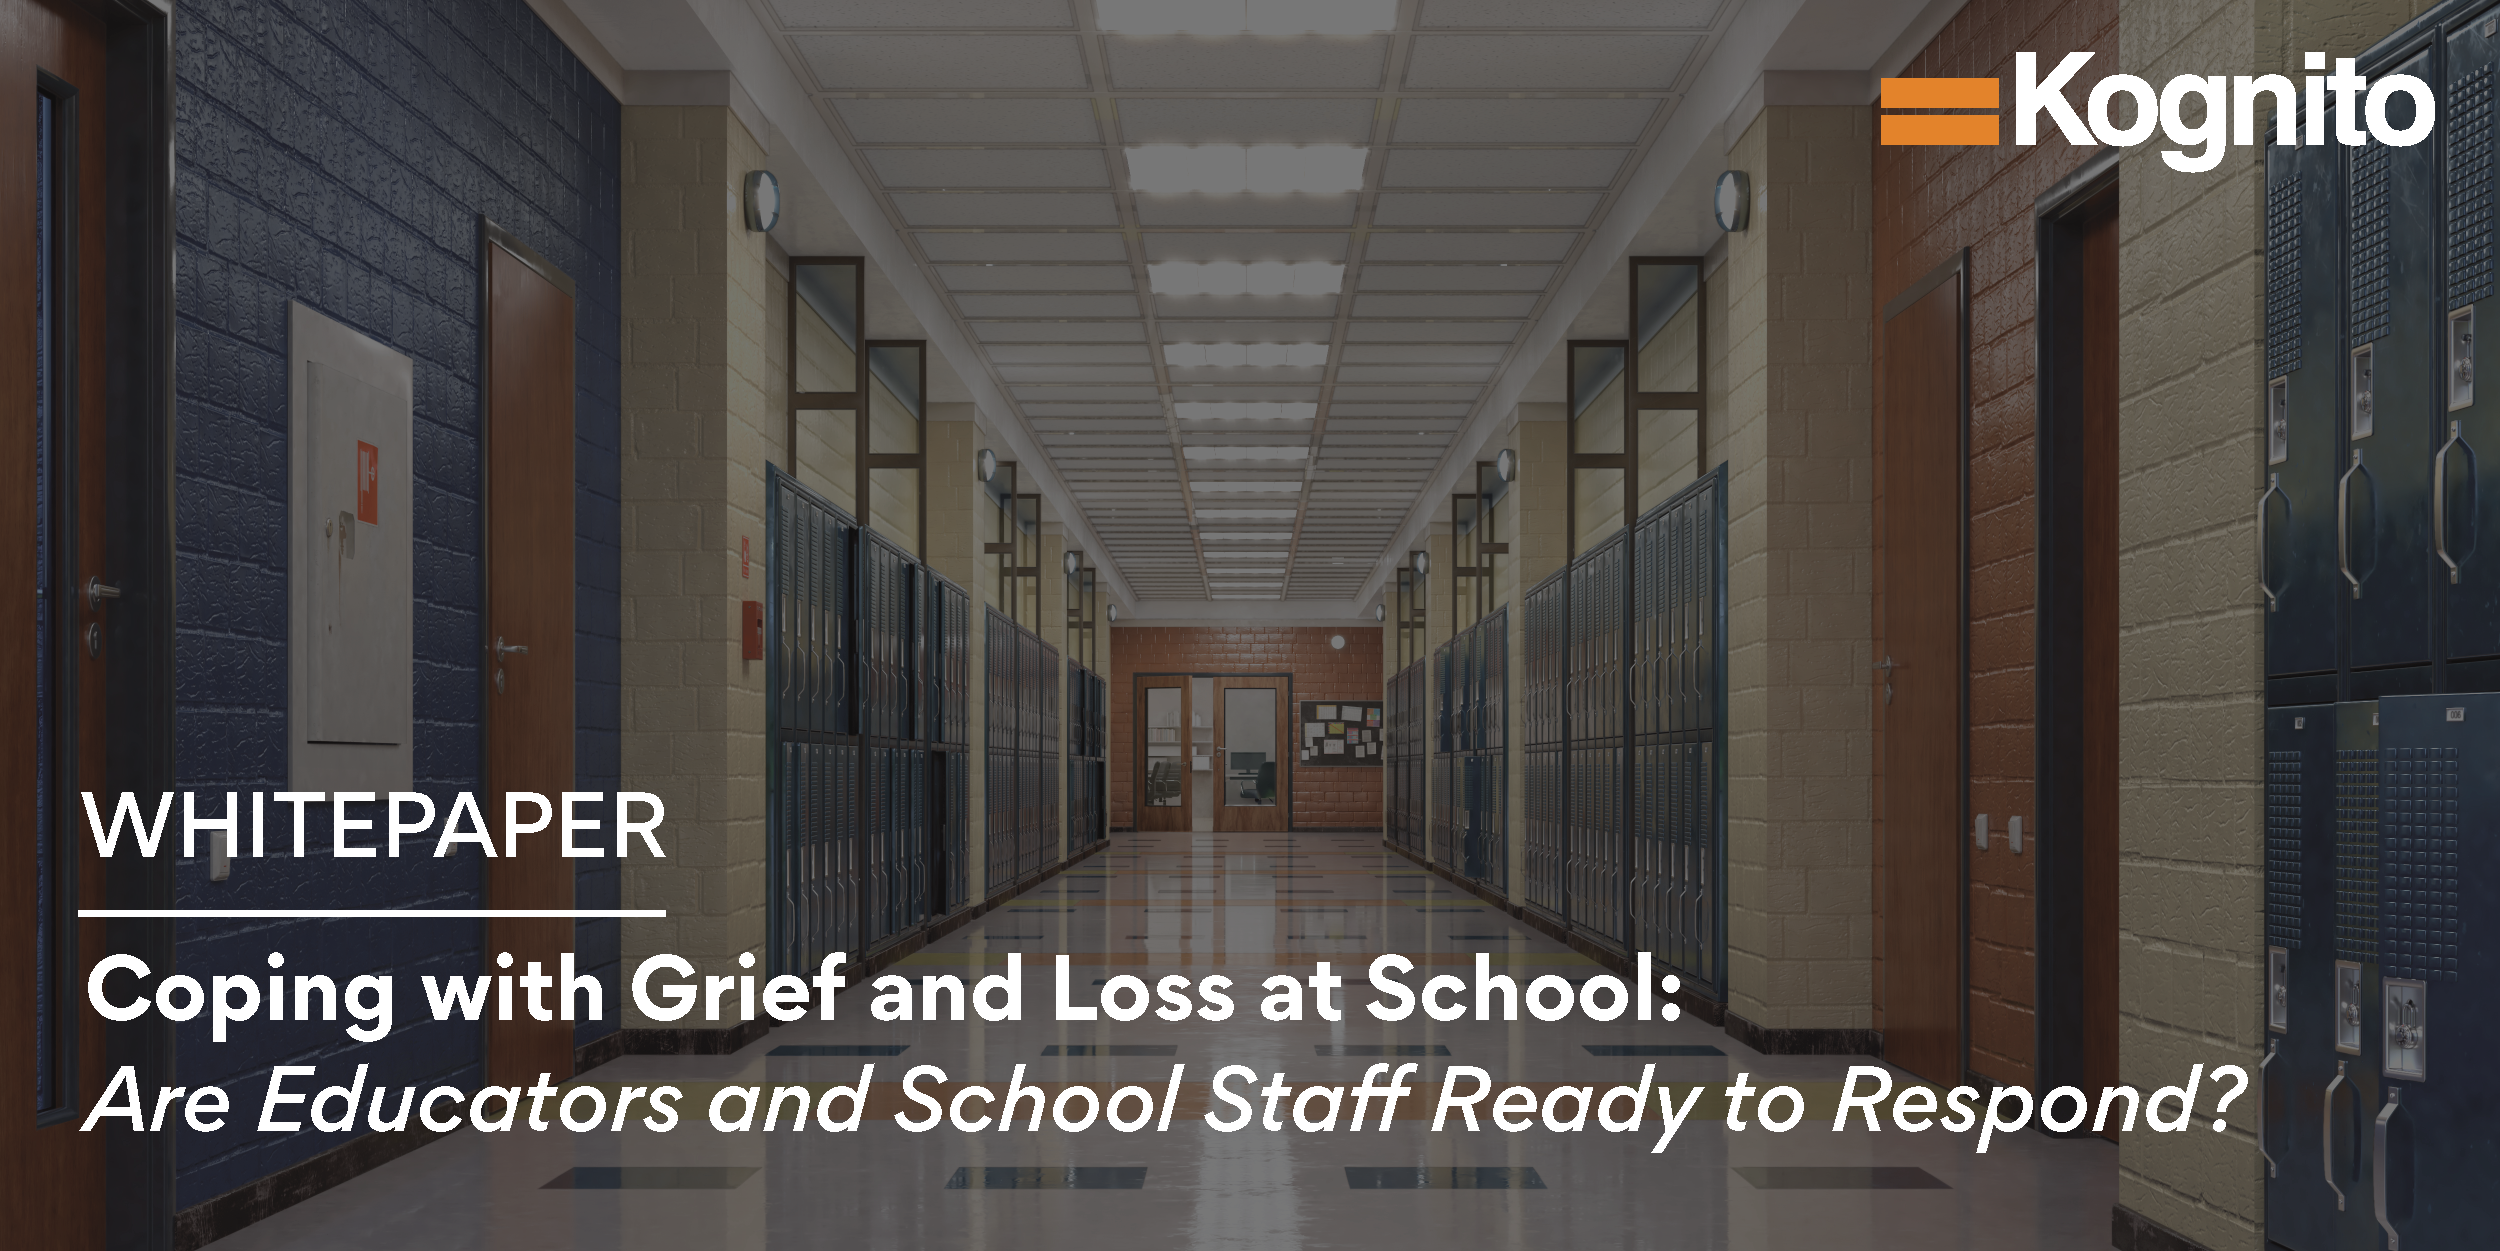 Coping with Grief and Loss at School: Are Educators and School Staff Ready to Respond?